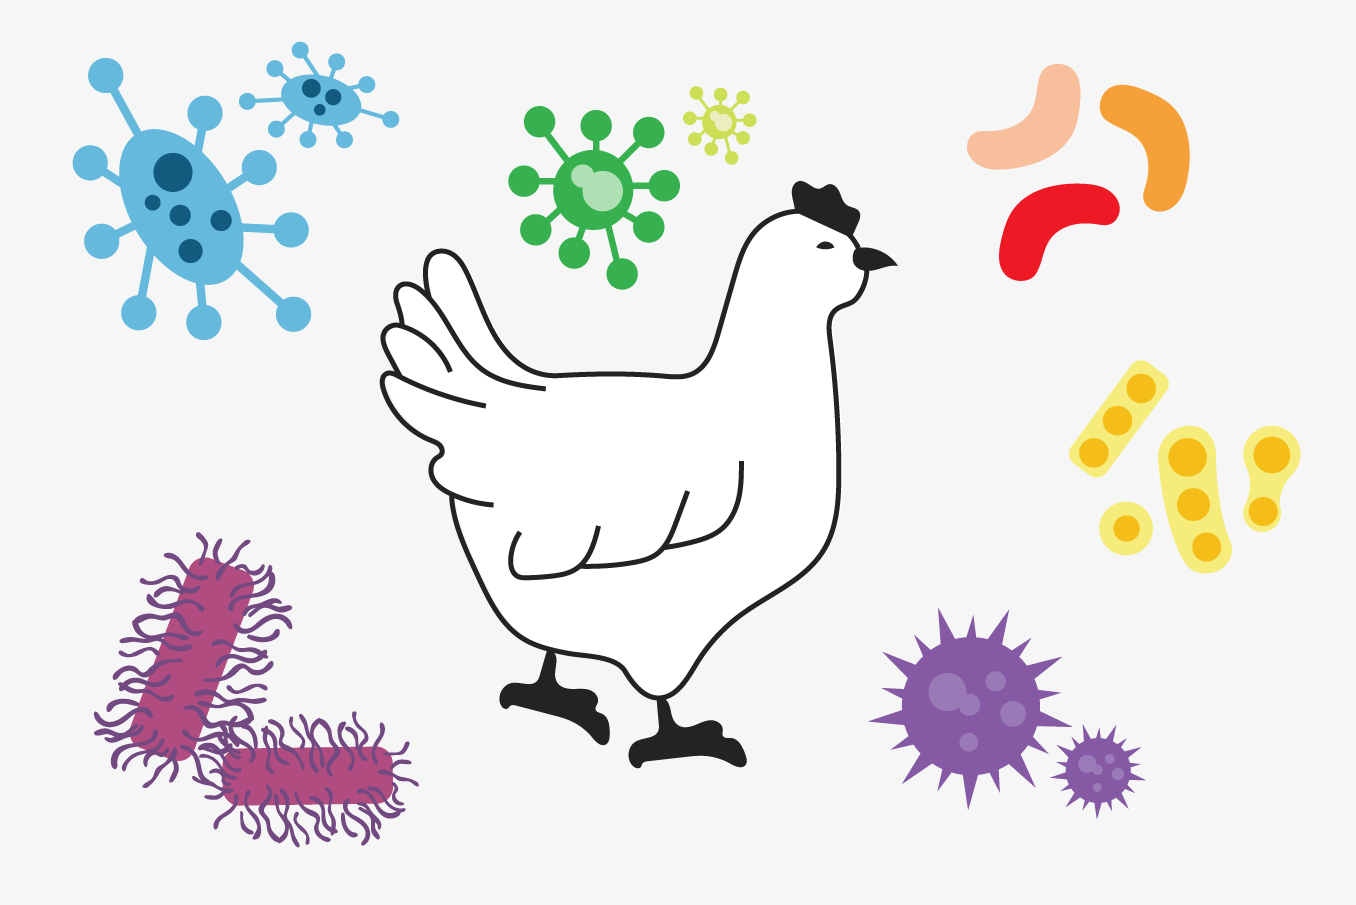 Exposure to high levels of atmospheric ammonia can suppress the immune system in chickens.